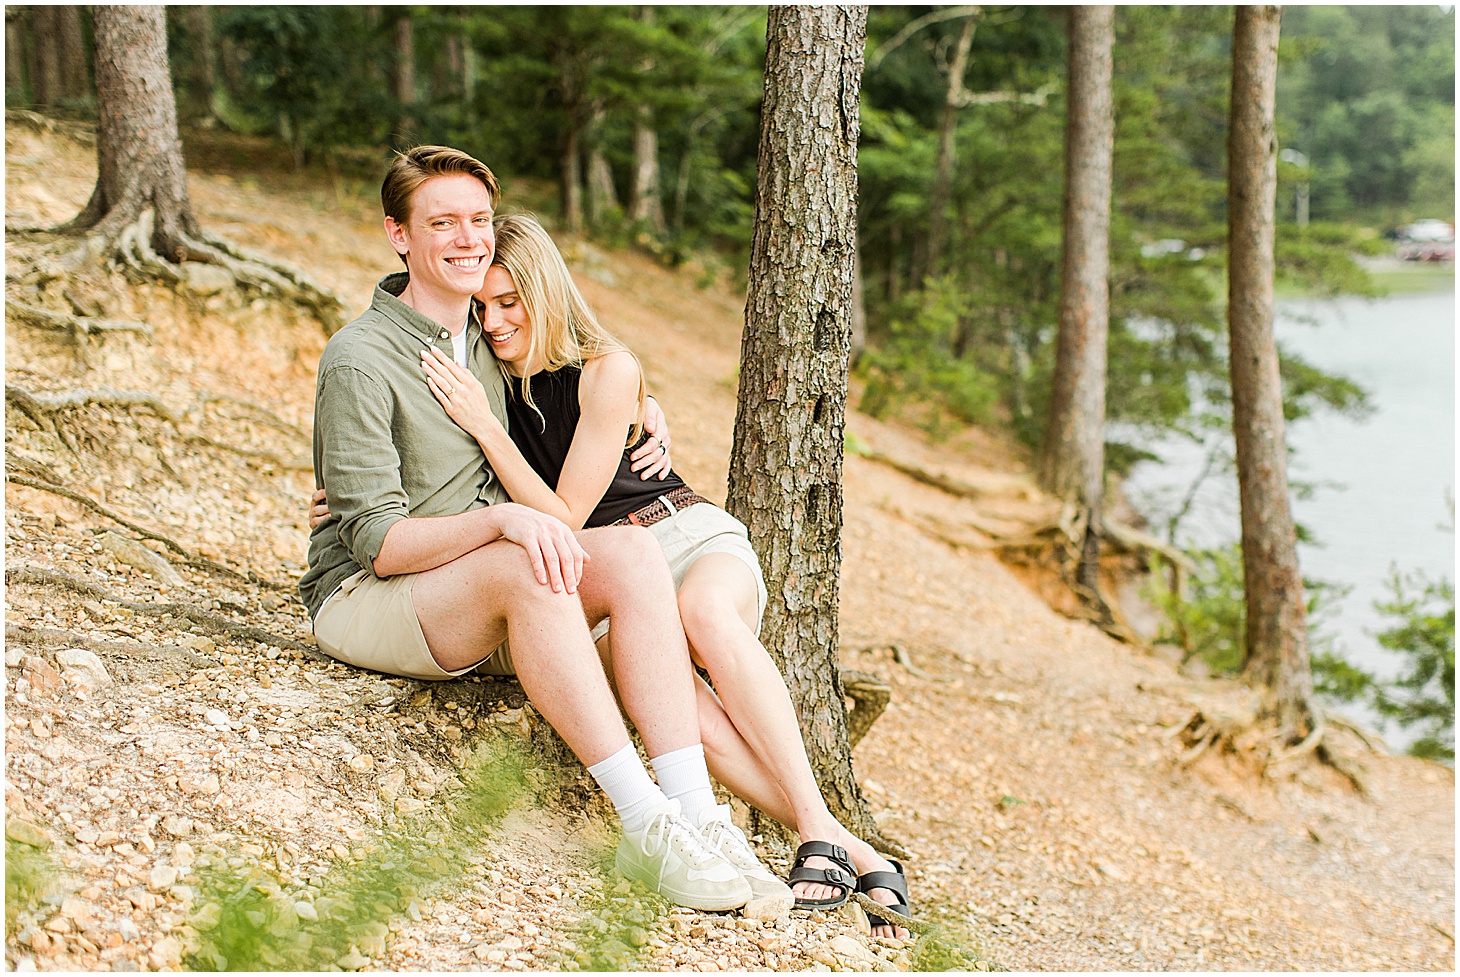 carvinscove_roanokeengagementsession_virginiaweddingphotographer_vaweddingphotographer_photo_0022-1.jpg